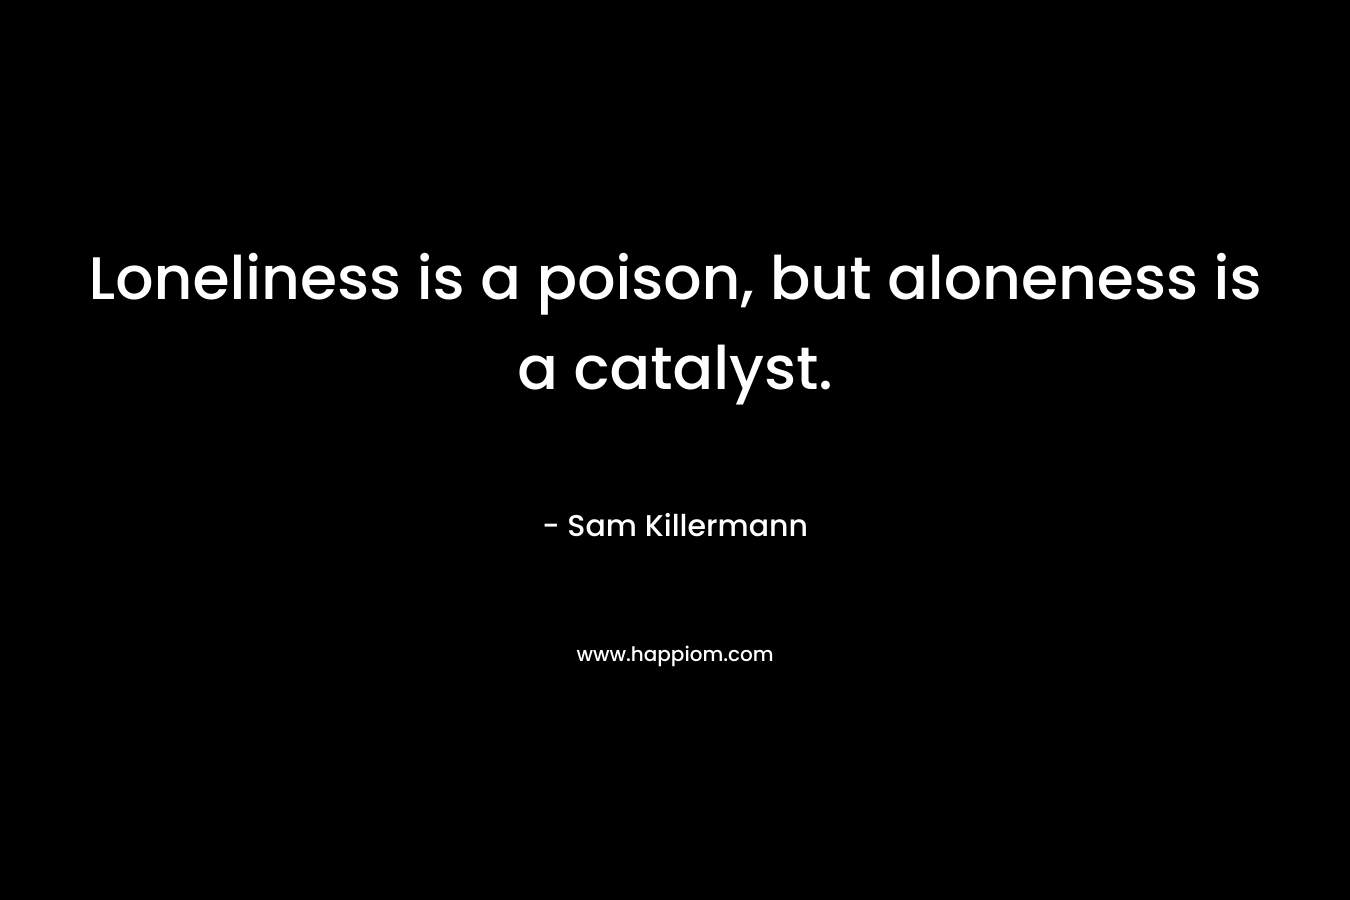 Loneliness is a poison, but aloneness is a catalyst. – Sam Killermann